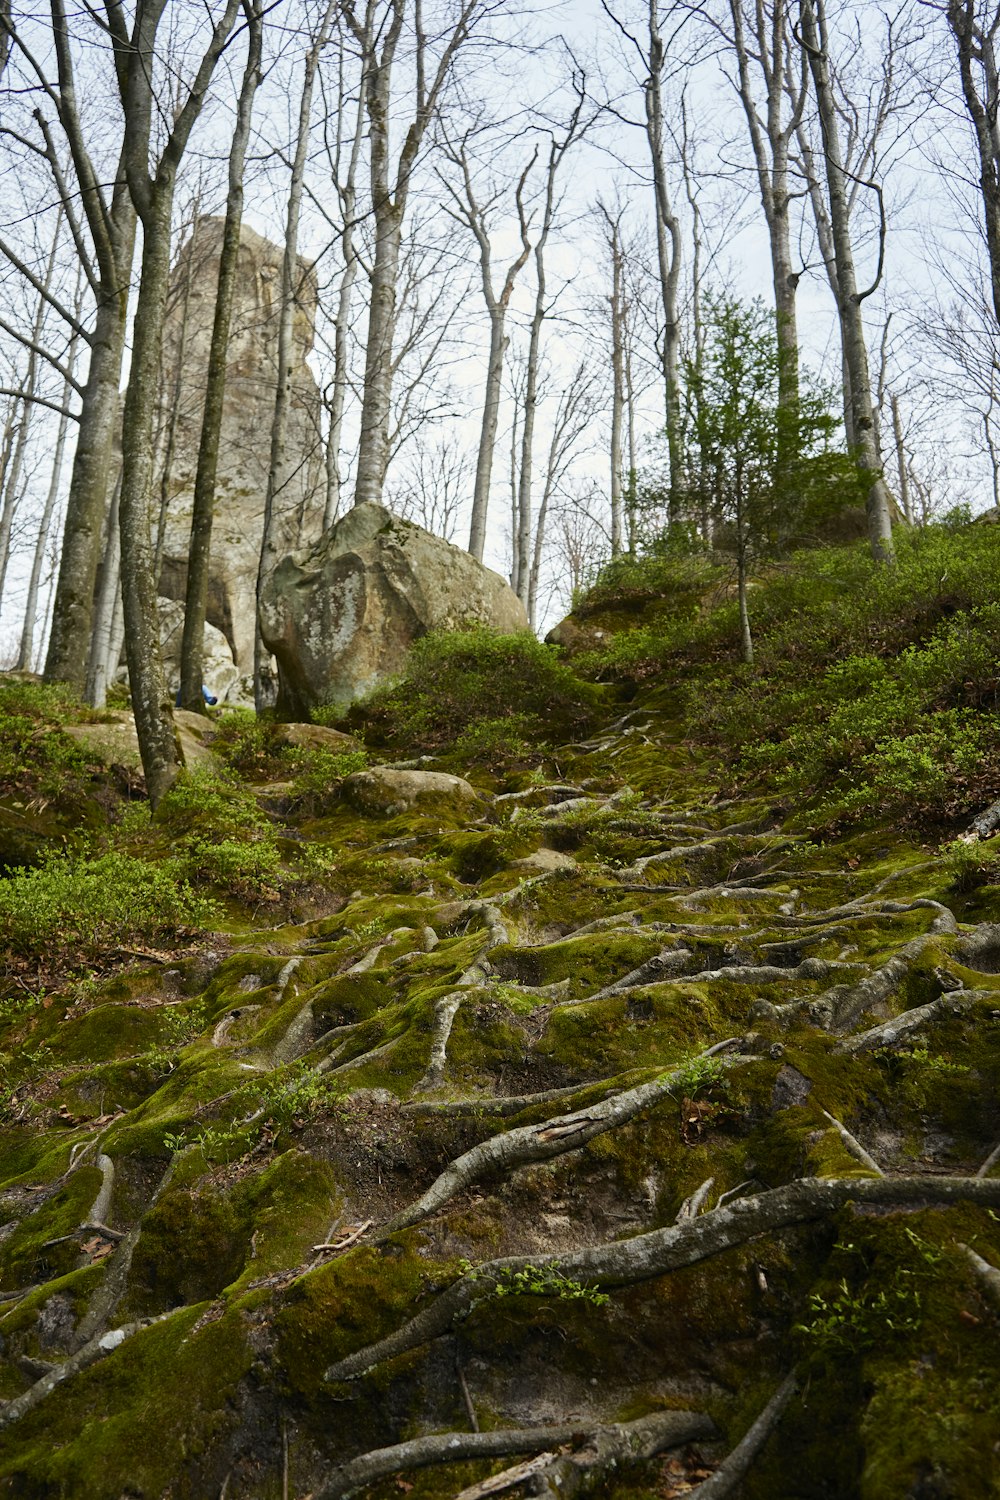 a mossy path in the woods with rocks and trees